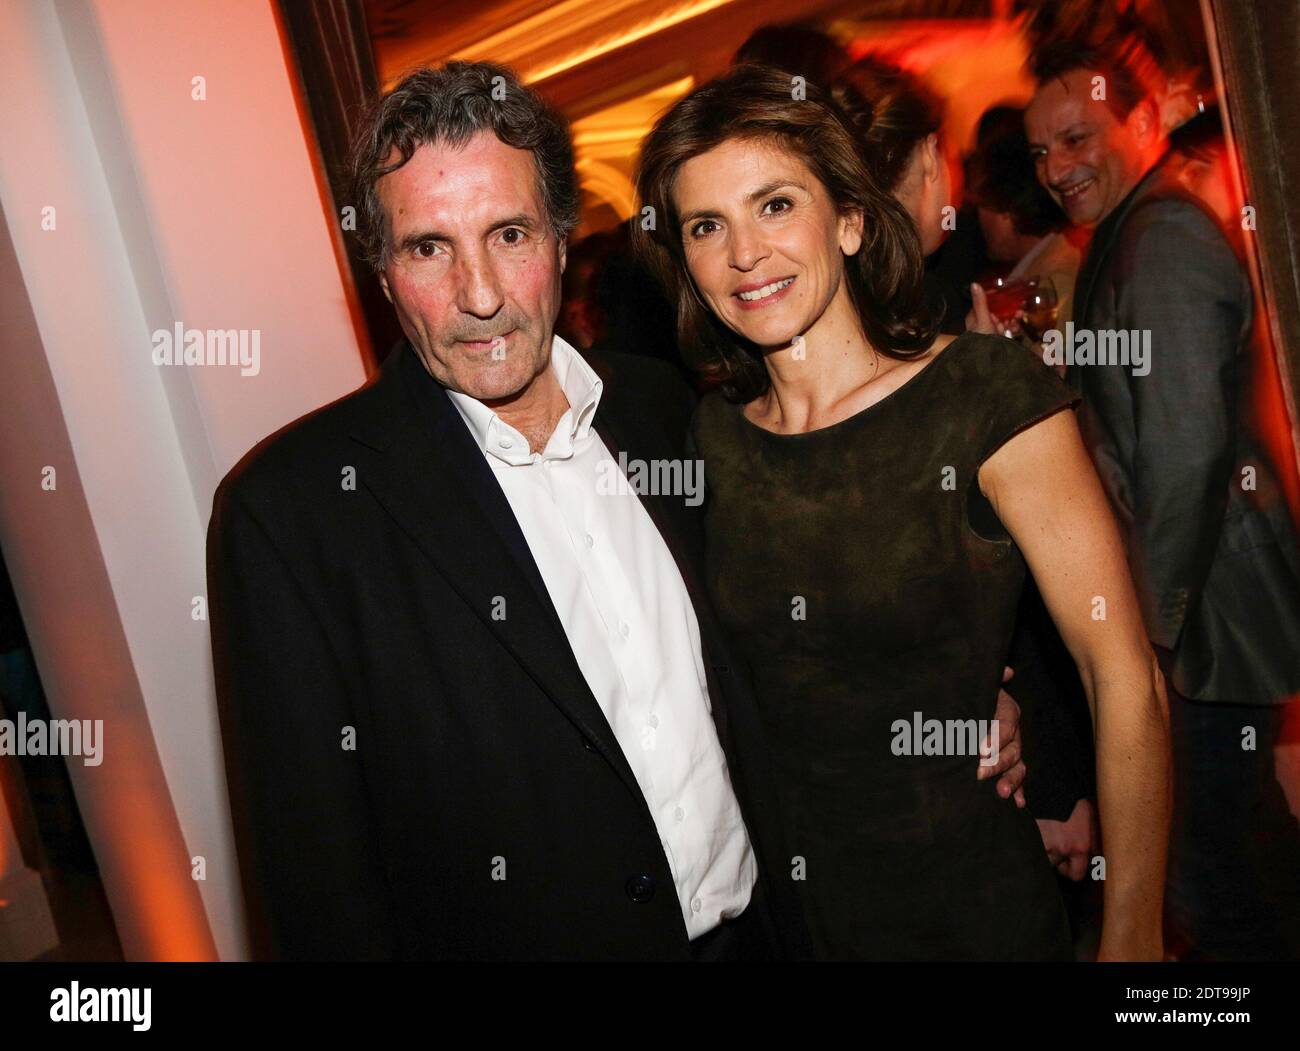 Jean-Jacques Bourdin and his wife Anne Nivat attending the Hotel Vernet  opening party in Paris, France, on March 20, 2014. Photo by ABACAPRESS.COM  Stock Photo - Alamy